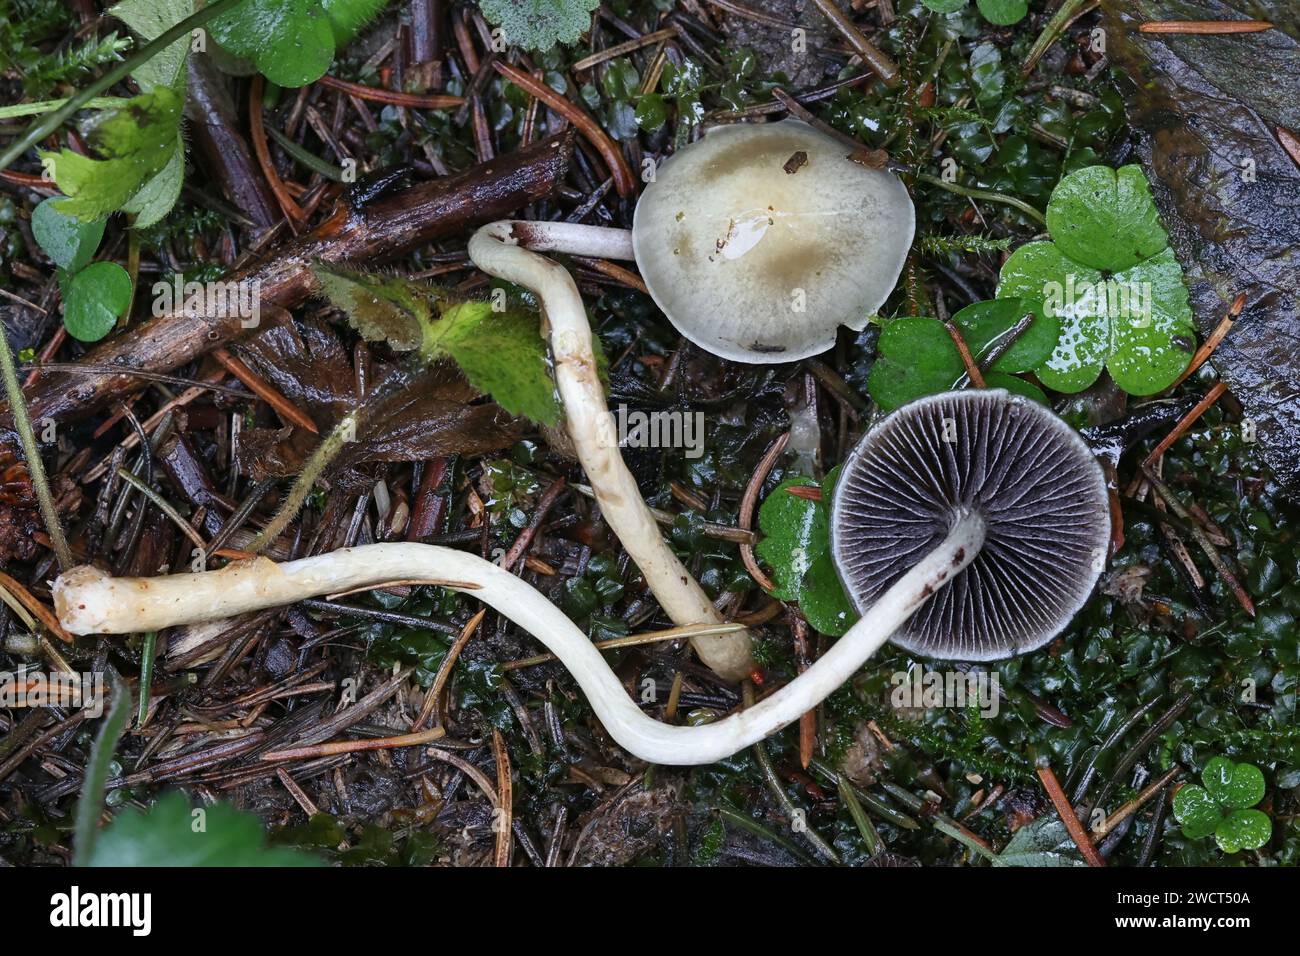 Stropharia semiglobata, commonly known as the dung roundhead, the halfglobe mushroom, or the hemispheric stropharia, wild mushroom from Finland Stock Photo